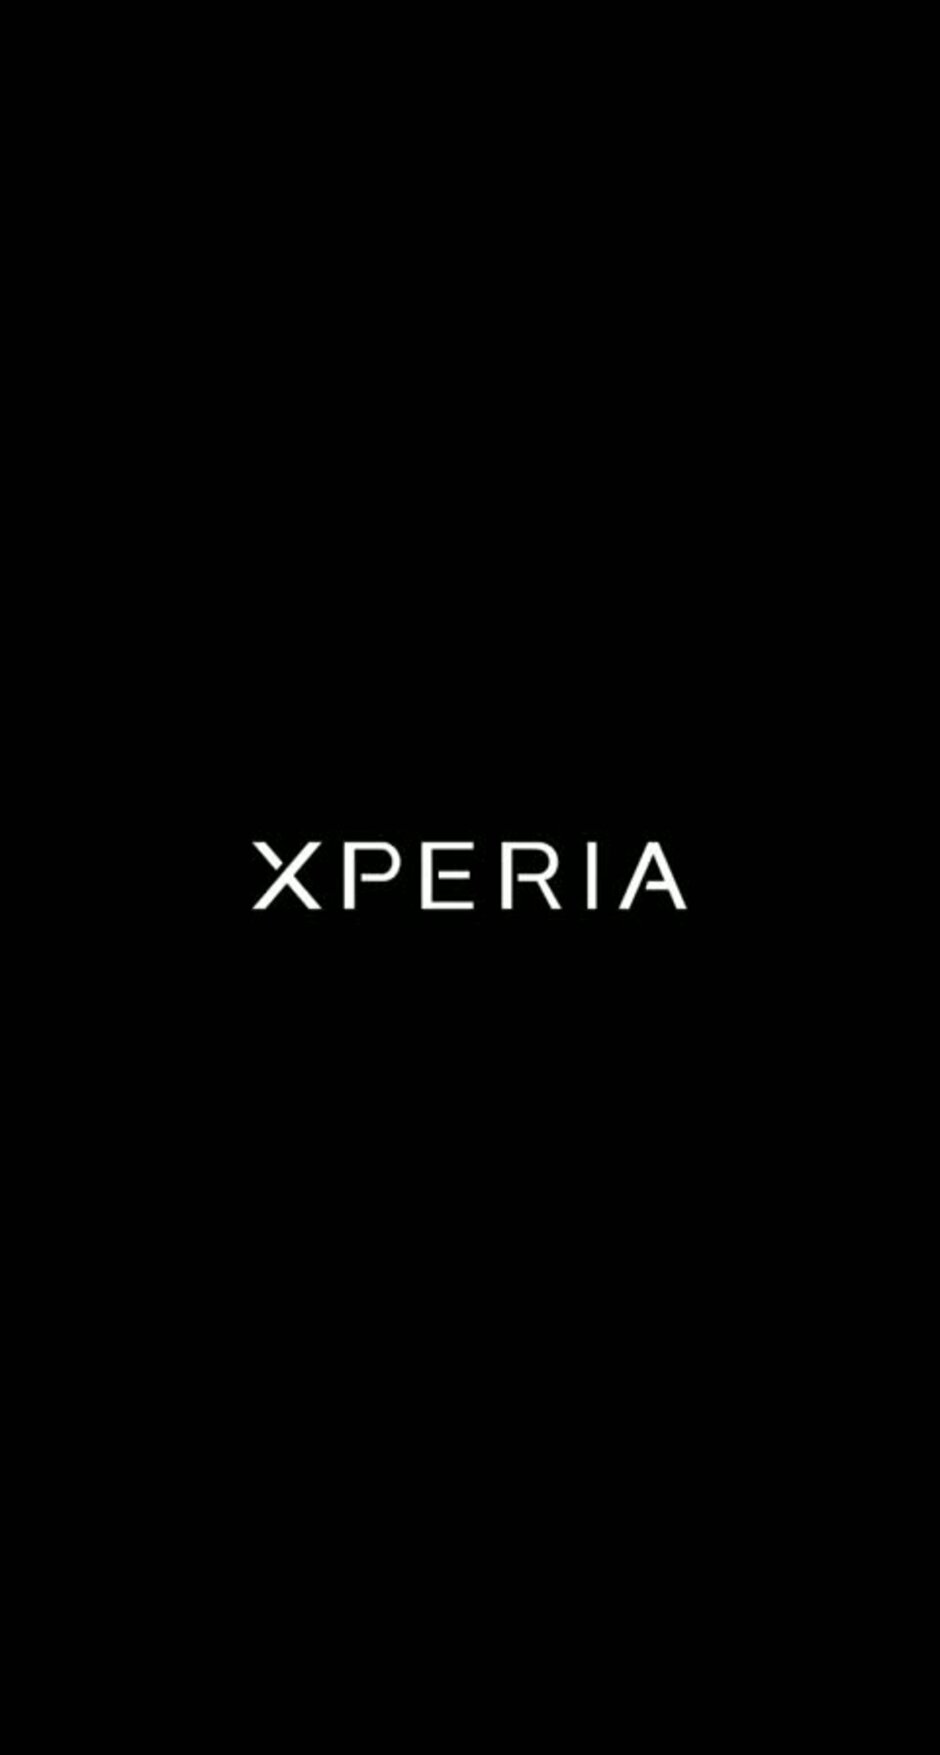 Sony teases Xperia 5 Plus (1.1) launch event